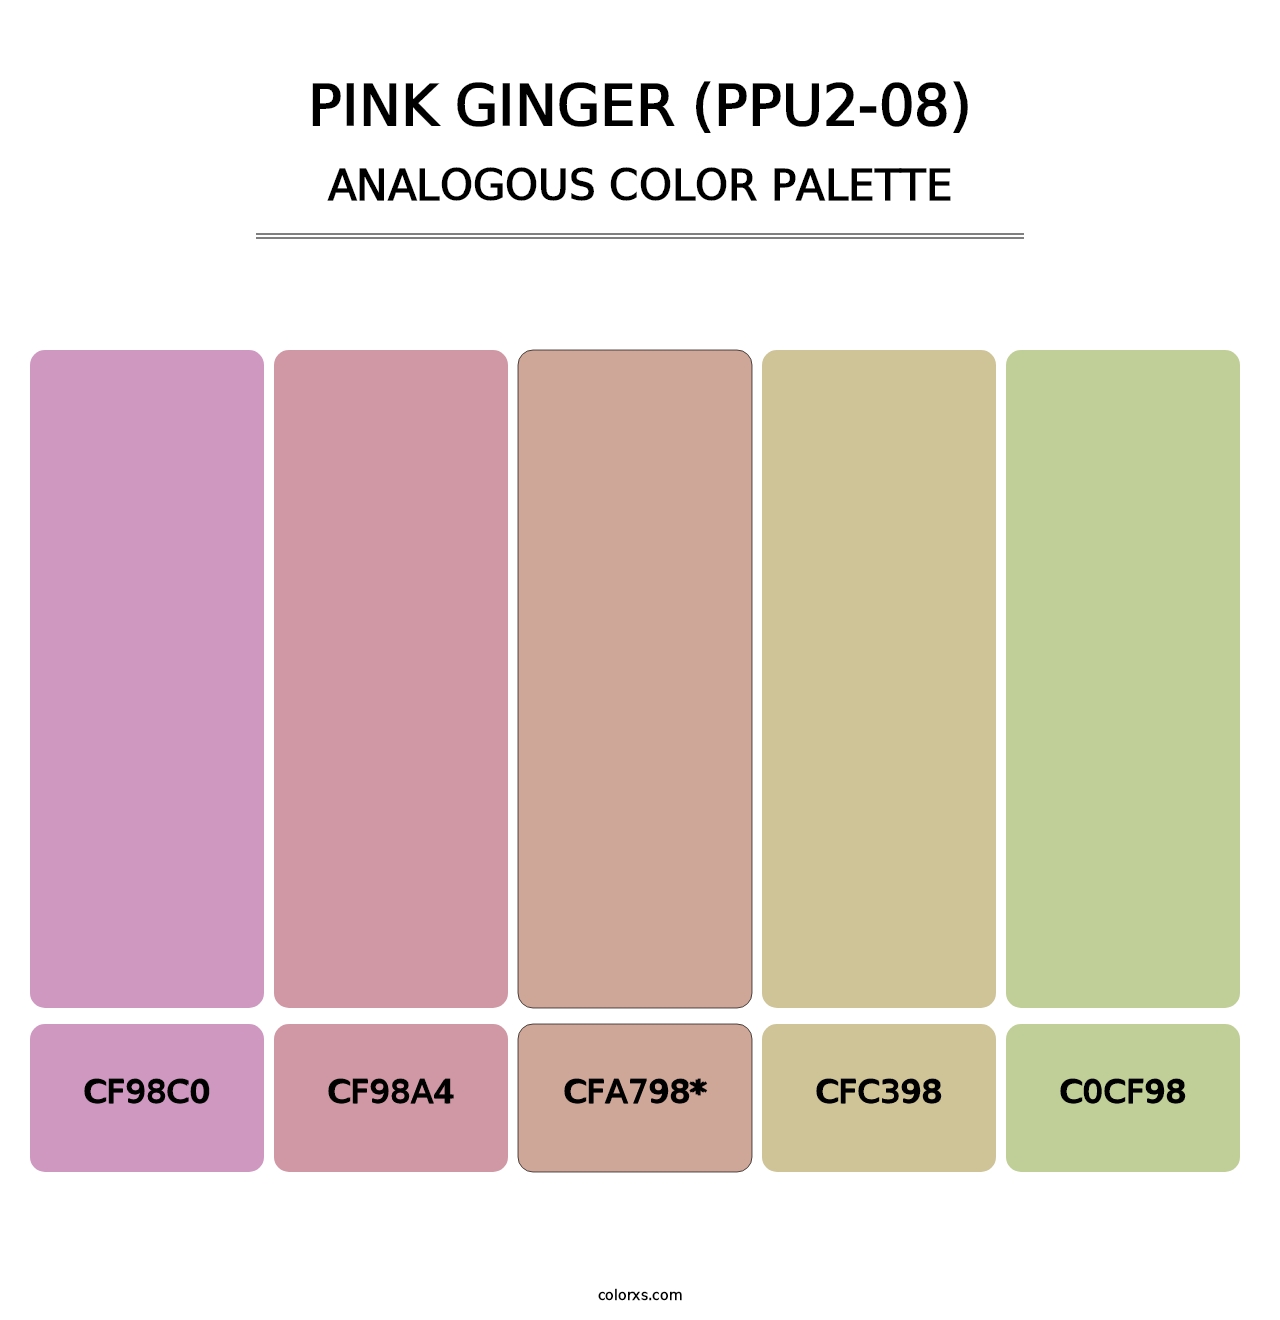 Pink Ginger (PPU2-08) - Analogous Color Palette